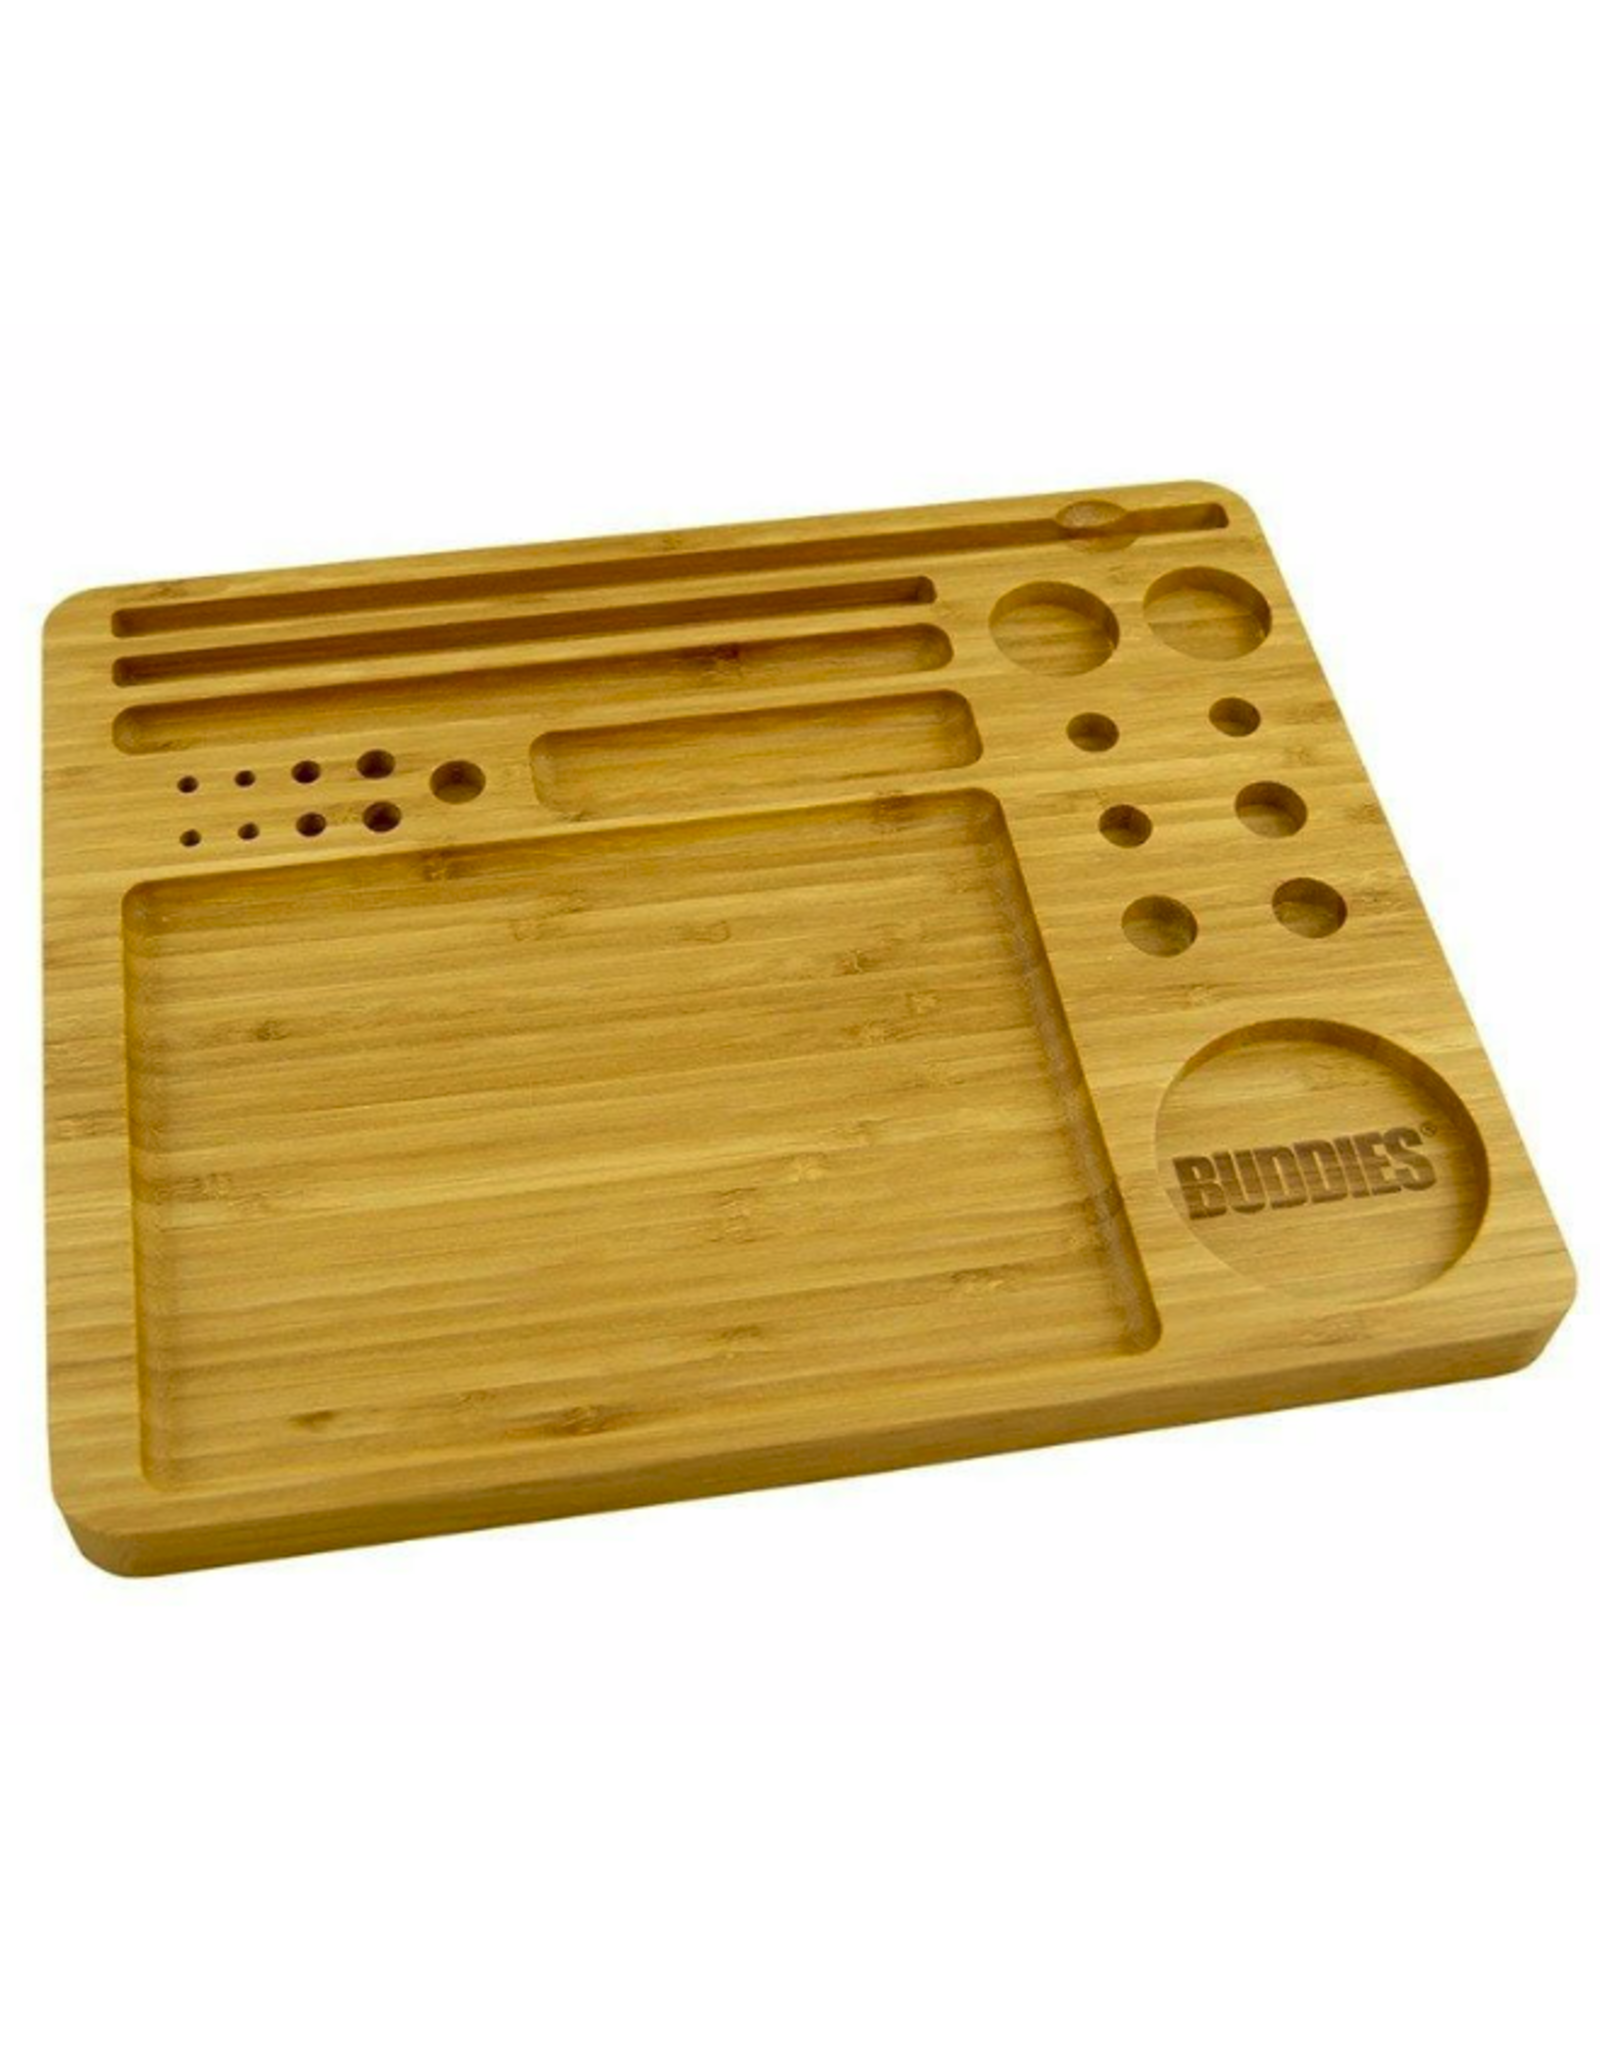 Buddies Bamboo 23in1 Rolling Tray